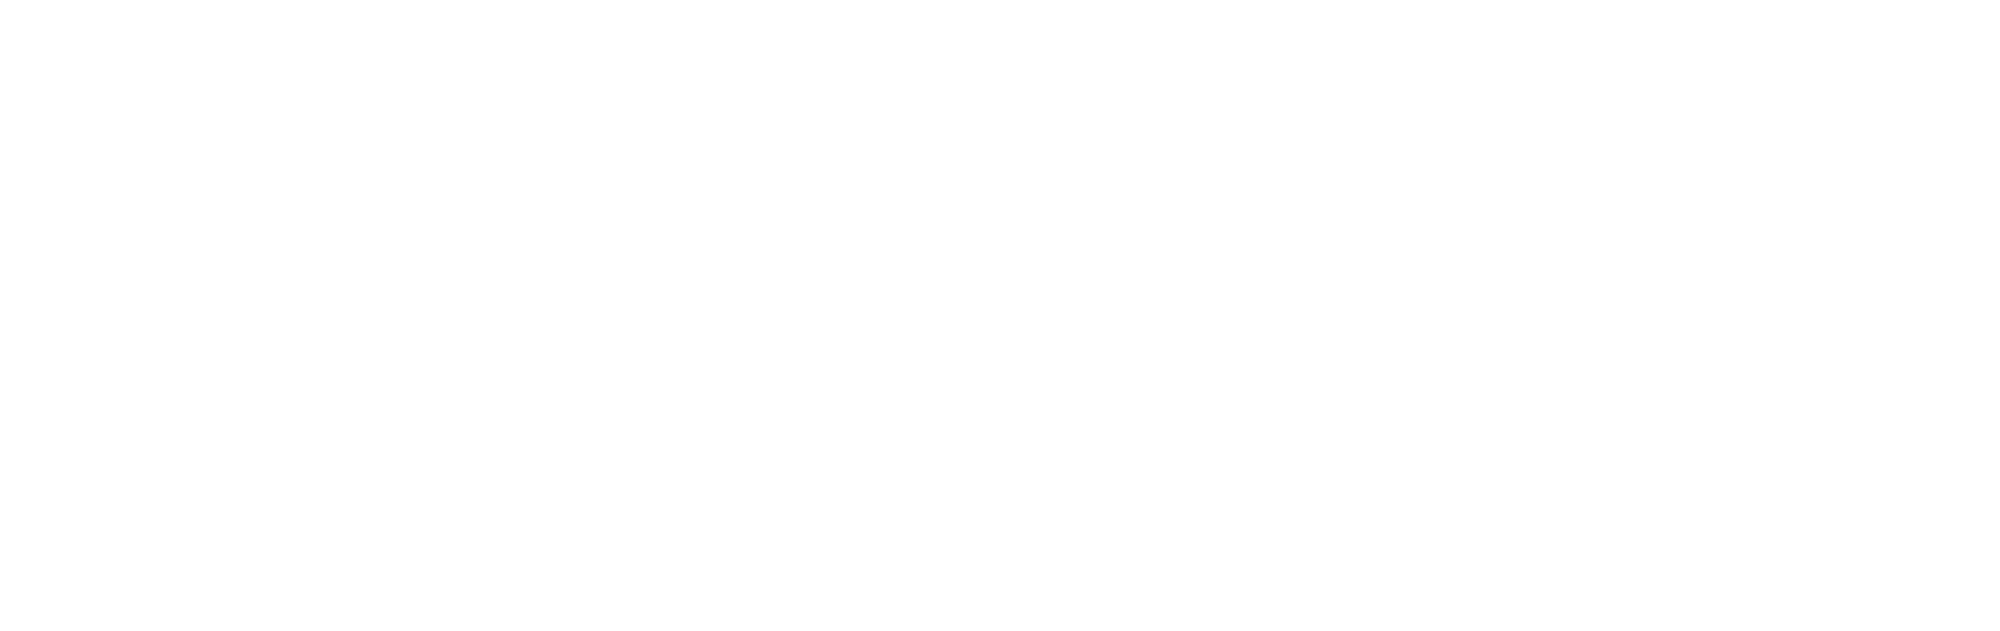 Paw Some Daily